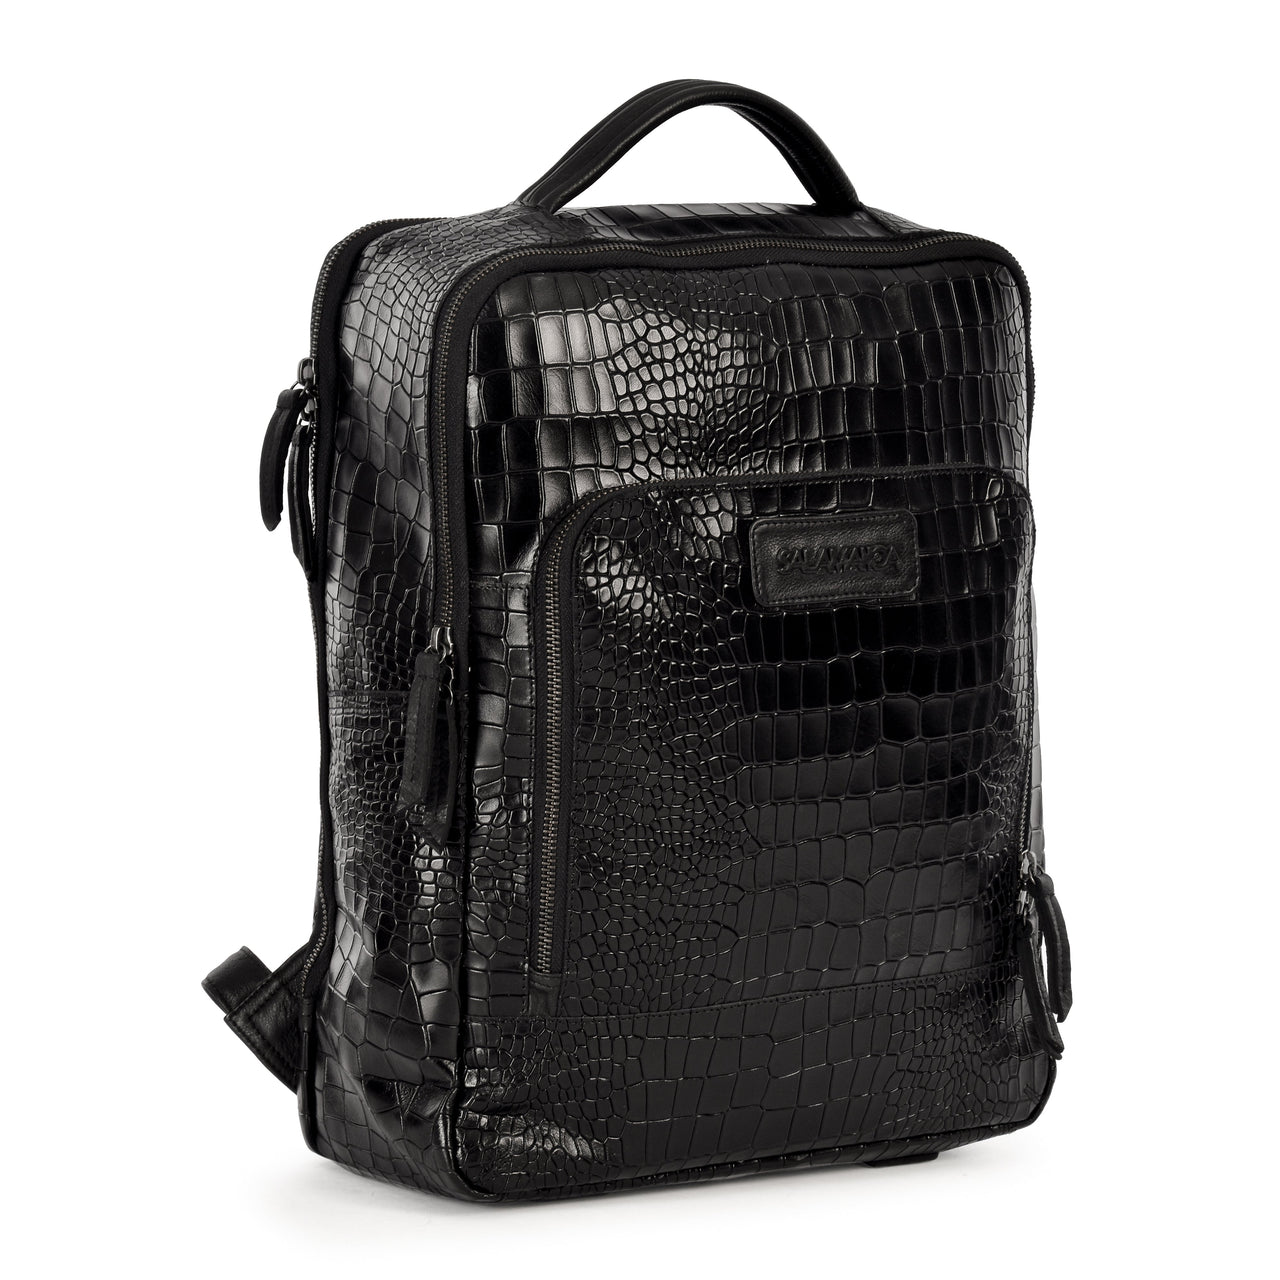 Caswell Backpack - Salient Black - Backpack